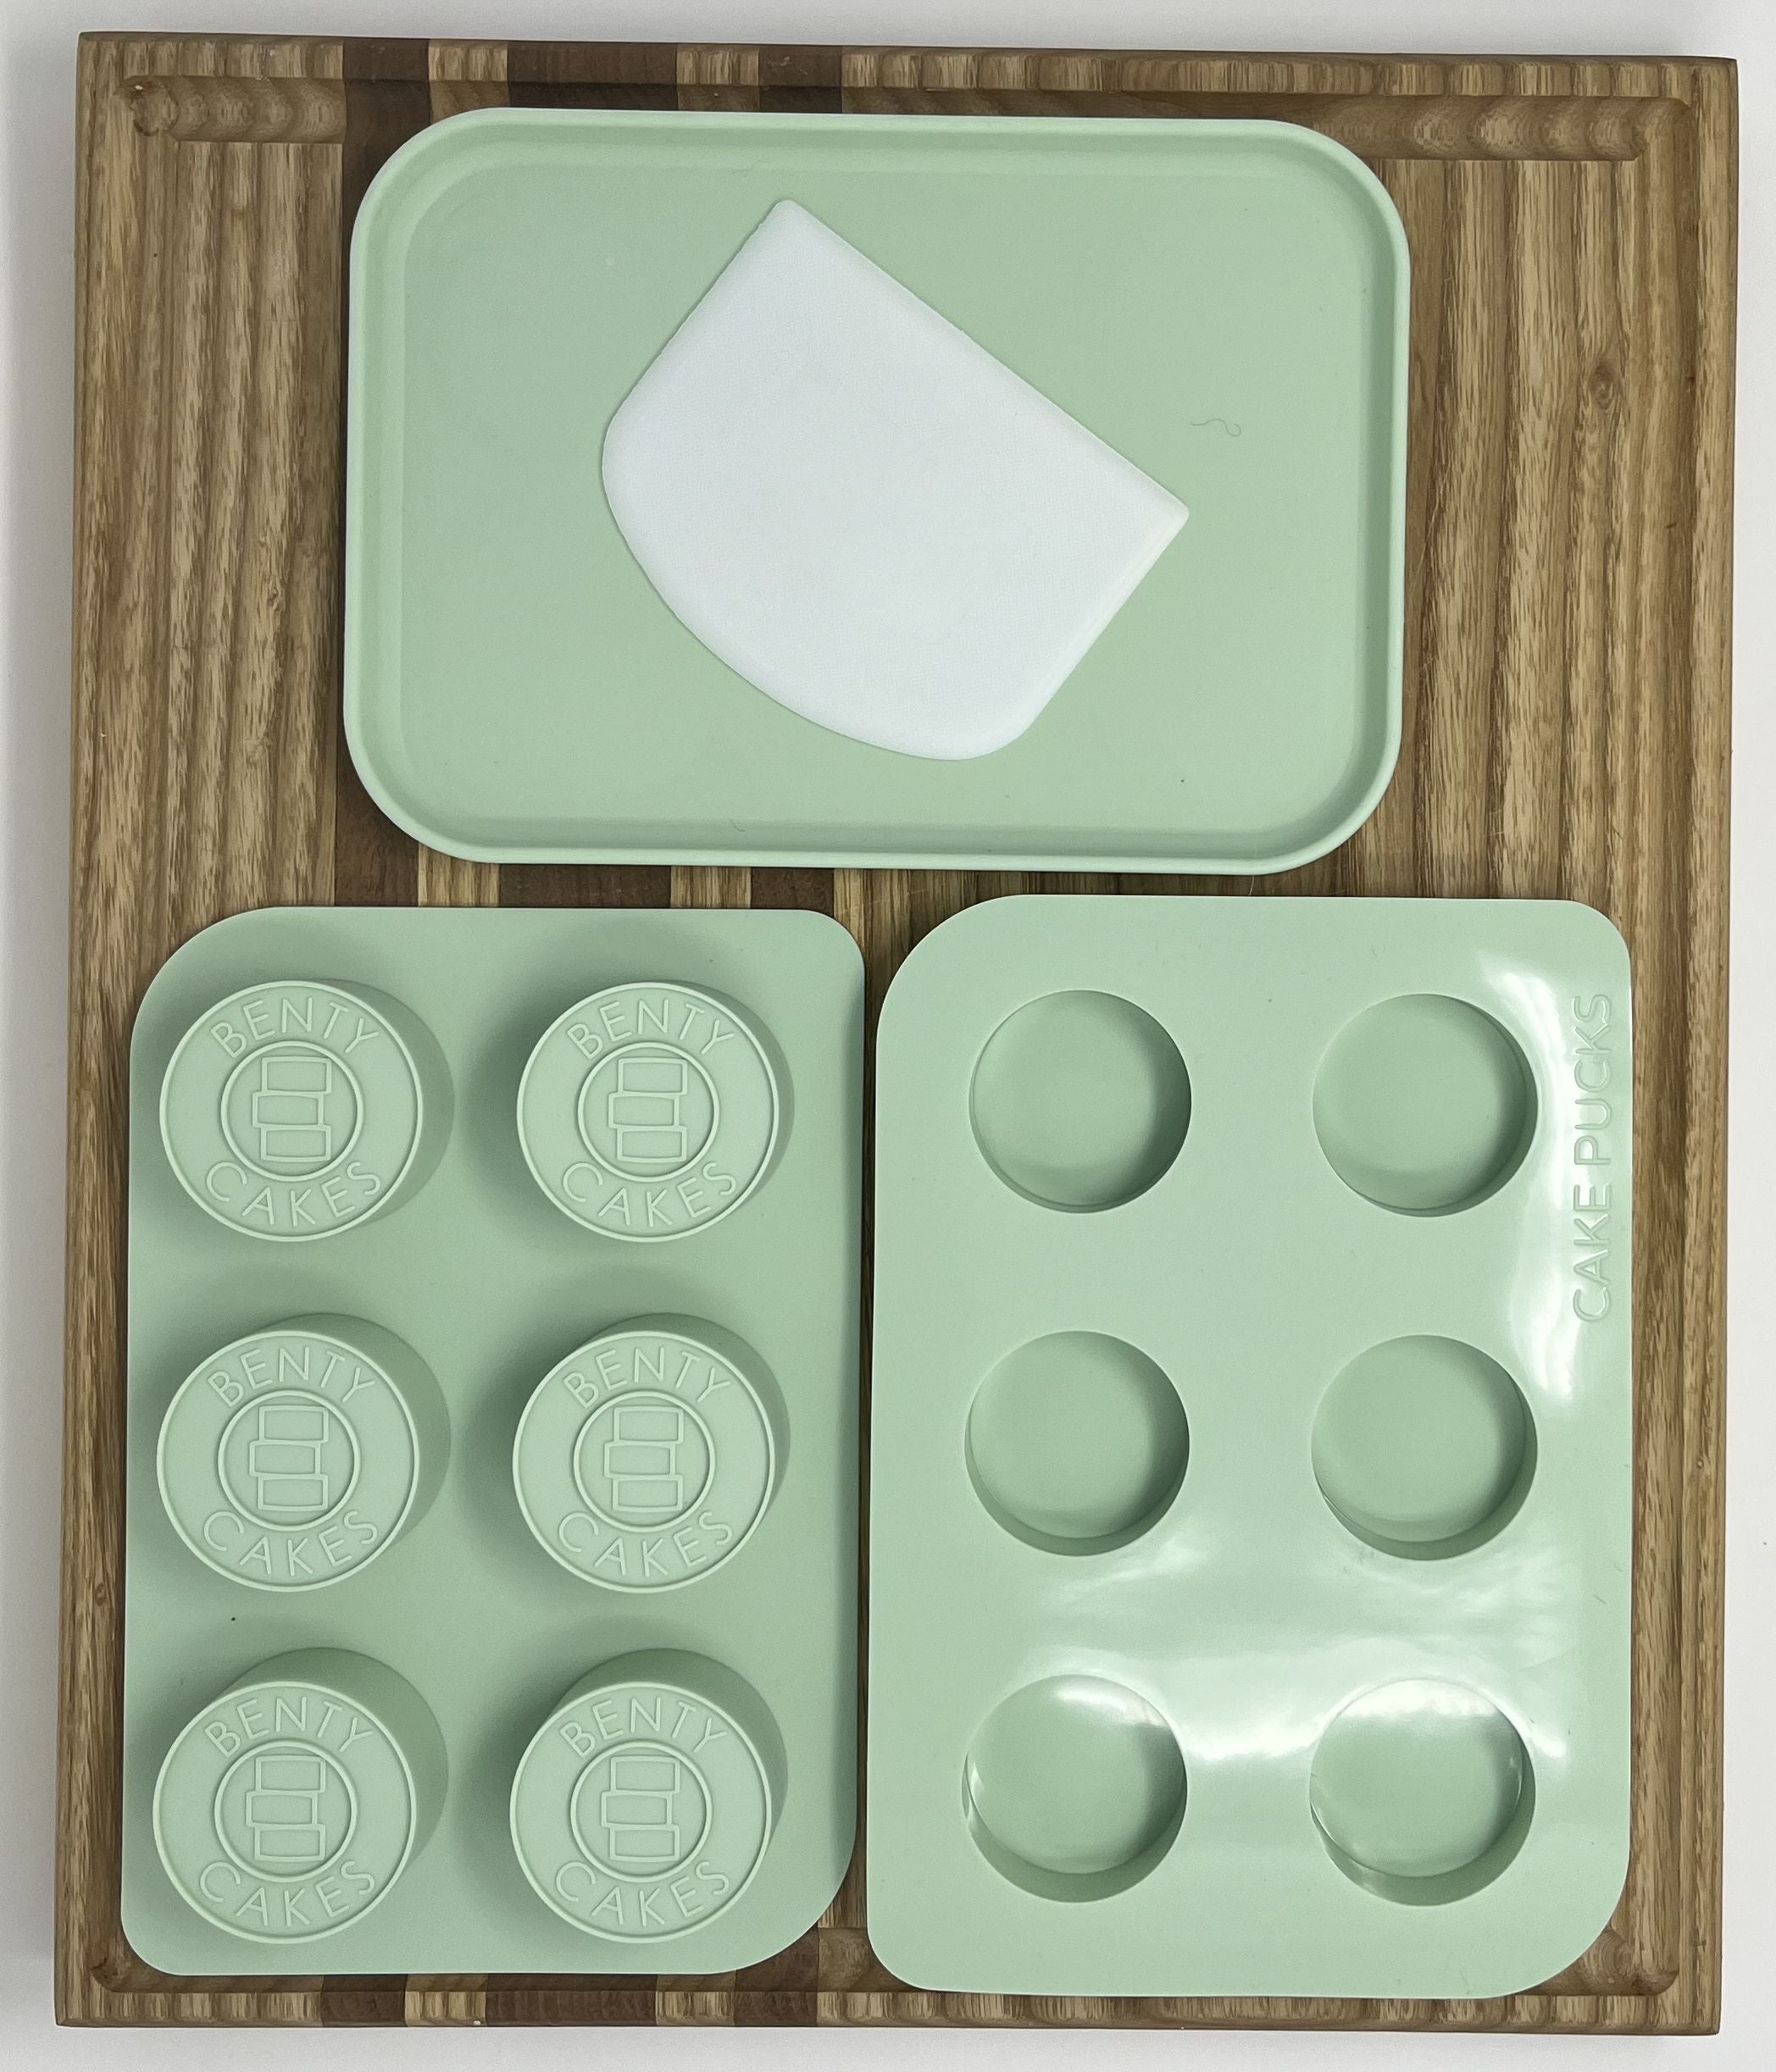  Benty Cakes The Original Cake Puck Bonus Bundle Mold Set – It's  not a Pop it's a Puck! The Easier Way to Make Chocolate Covered  Desserts–BPA Free Silicone–Includes Molds, 2 Trays